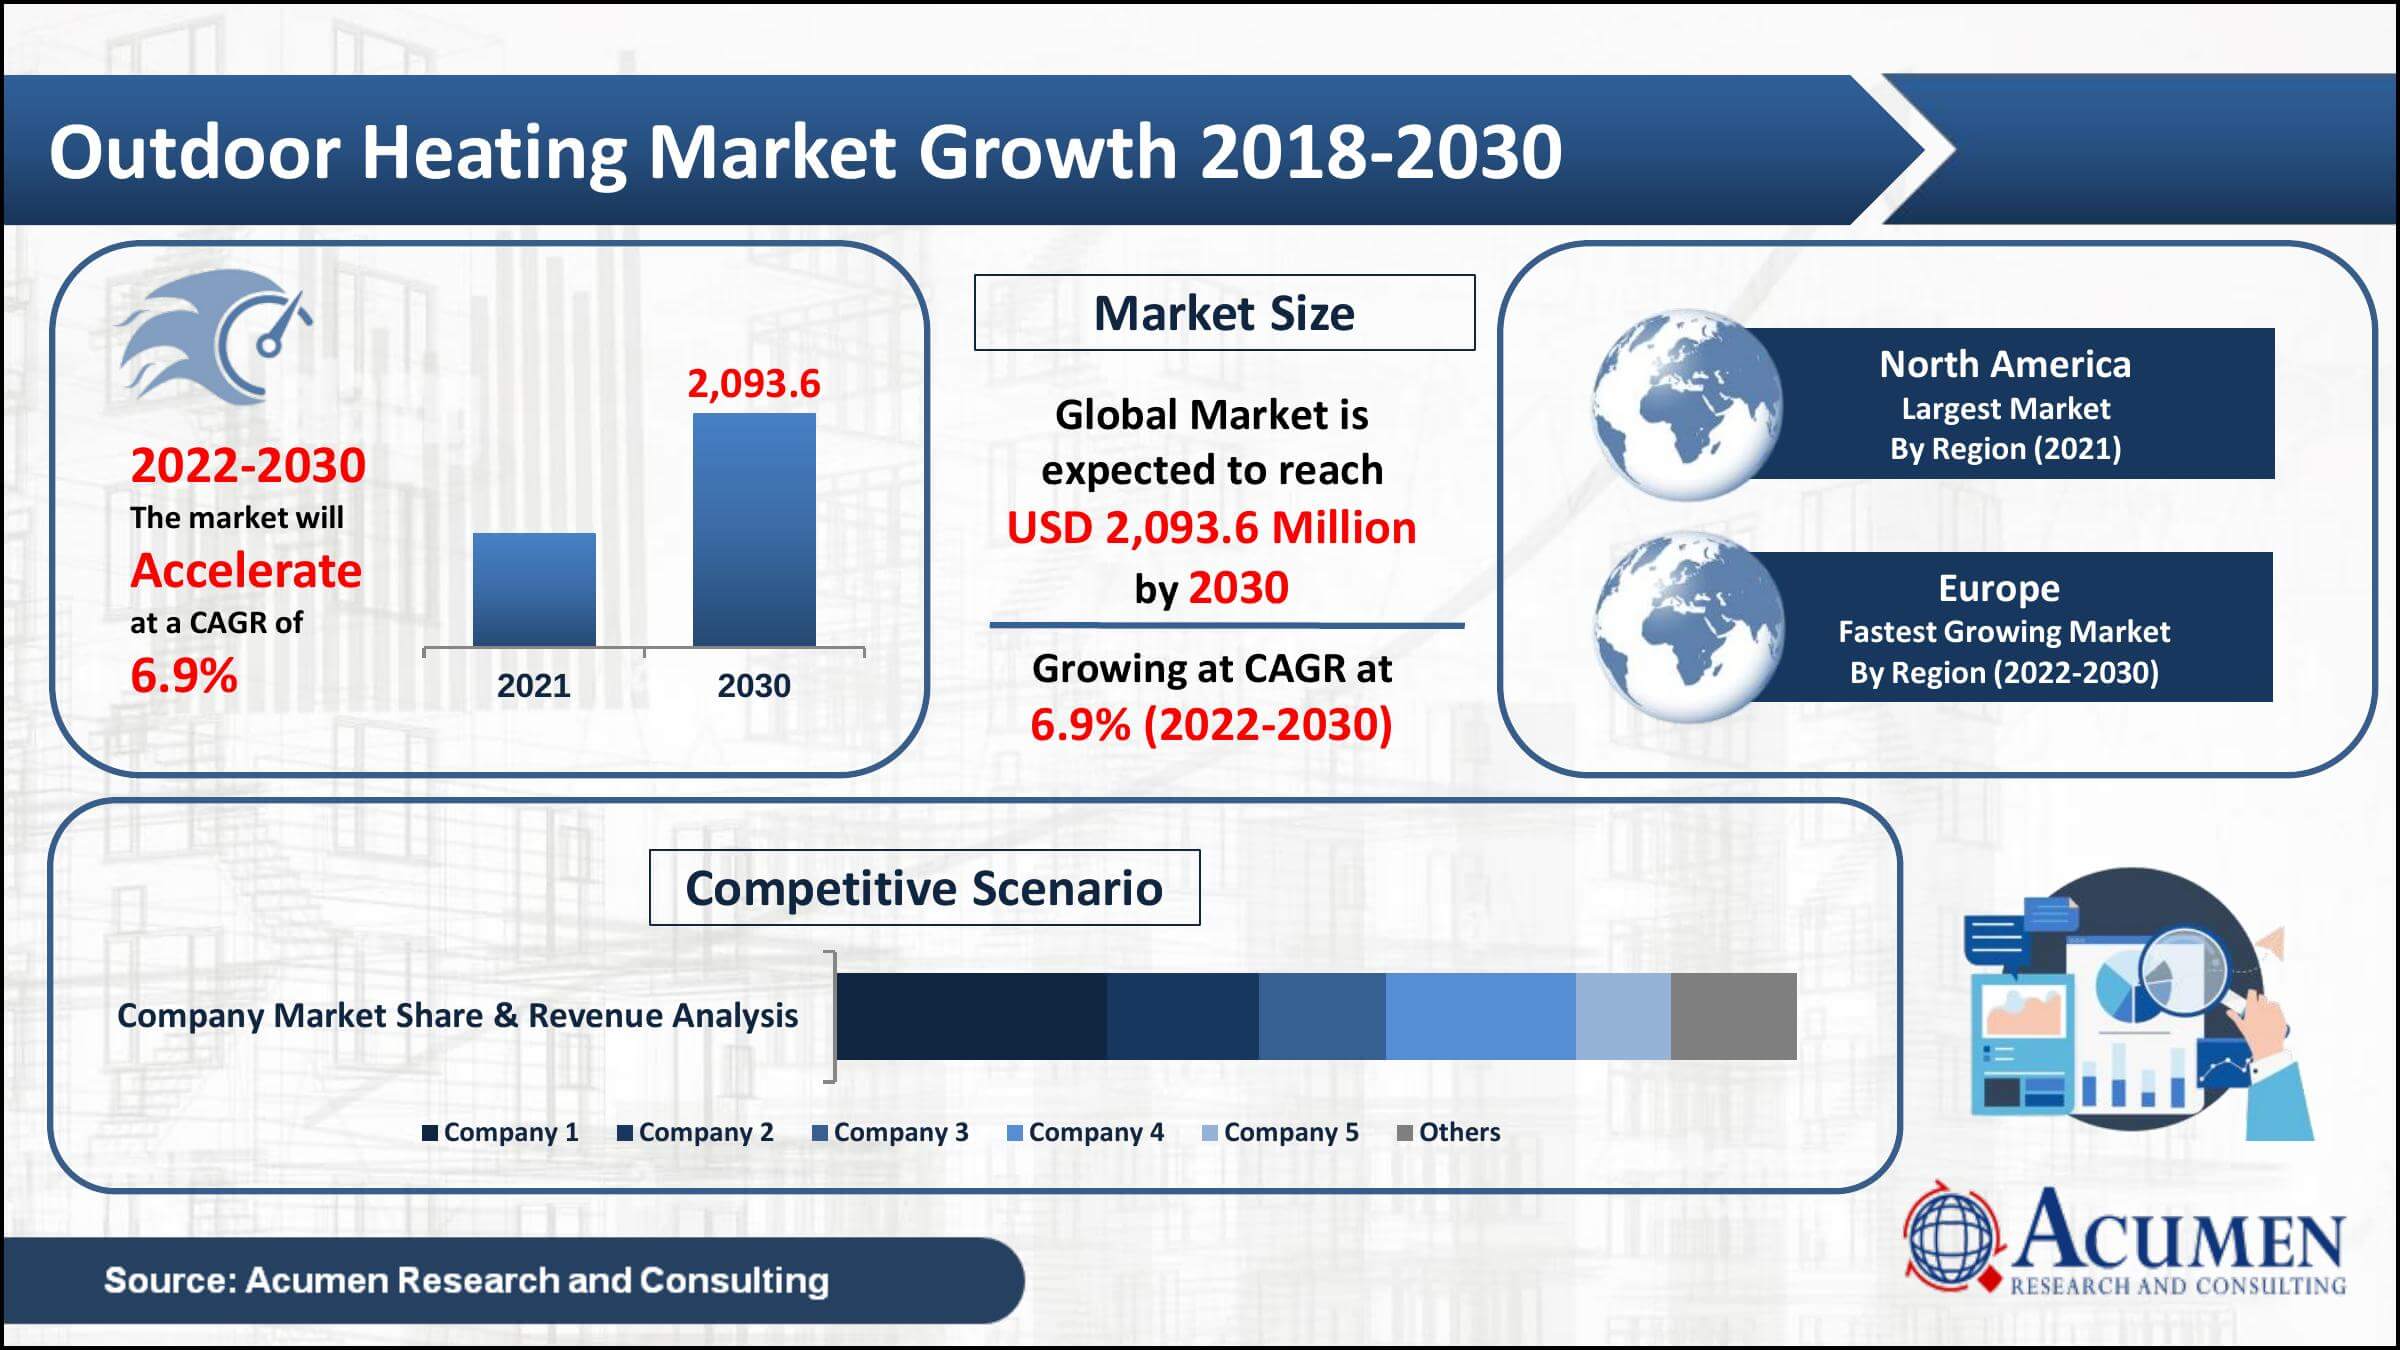 Outdoor Heatings Market is expected to grow at a CAGR of around 6.9% between 2022 and 2030.